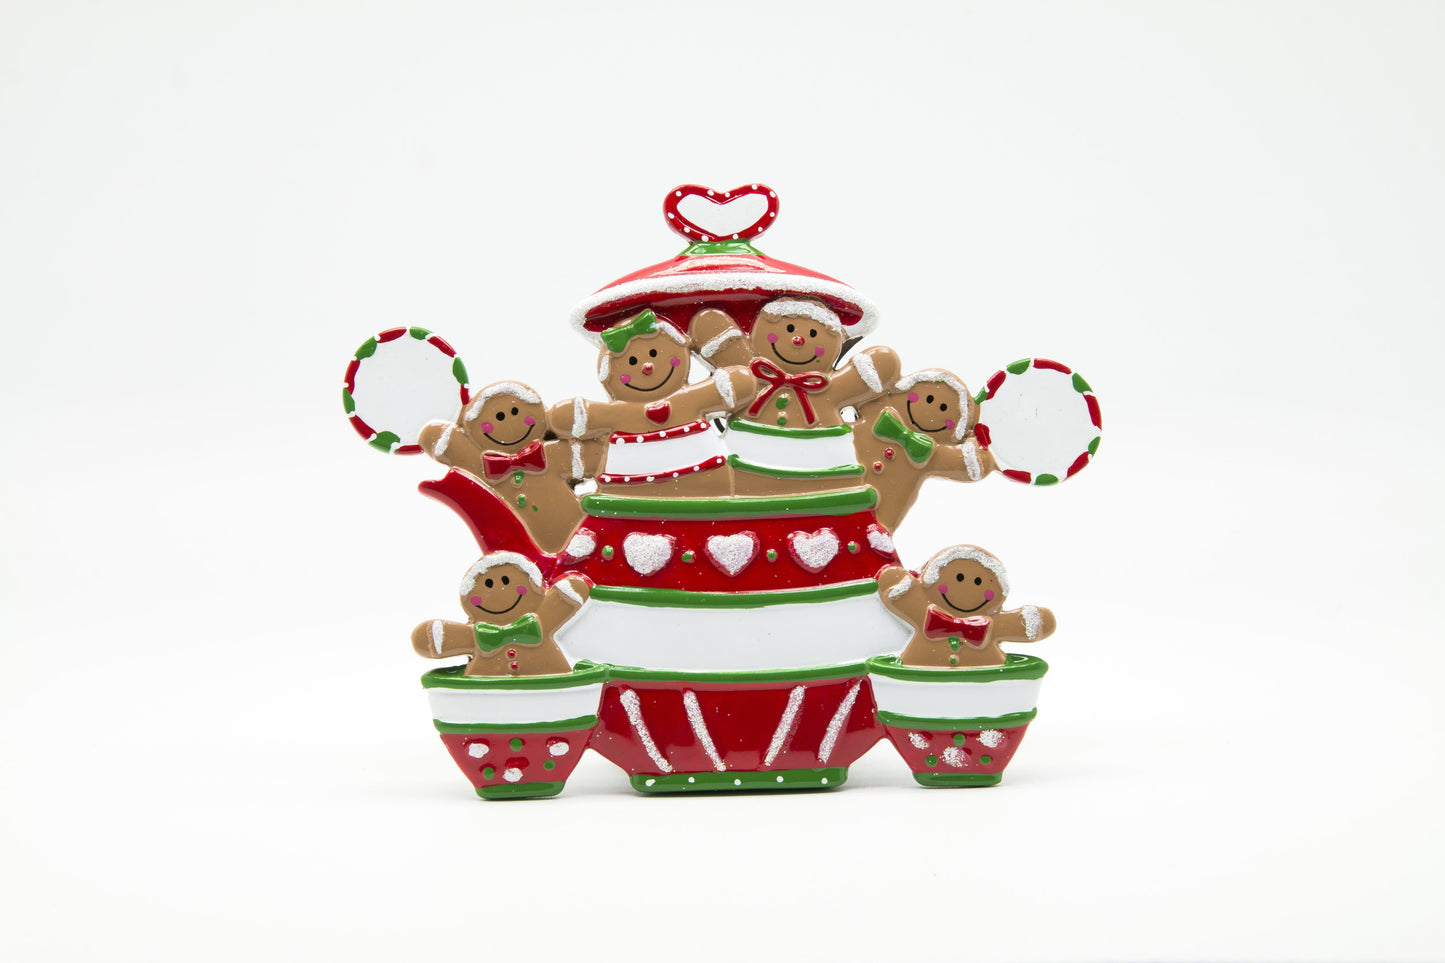 Gingerbread Man Teapot - Christmas Table Topper Ornament (Suitable for Personalization)